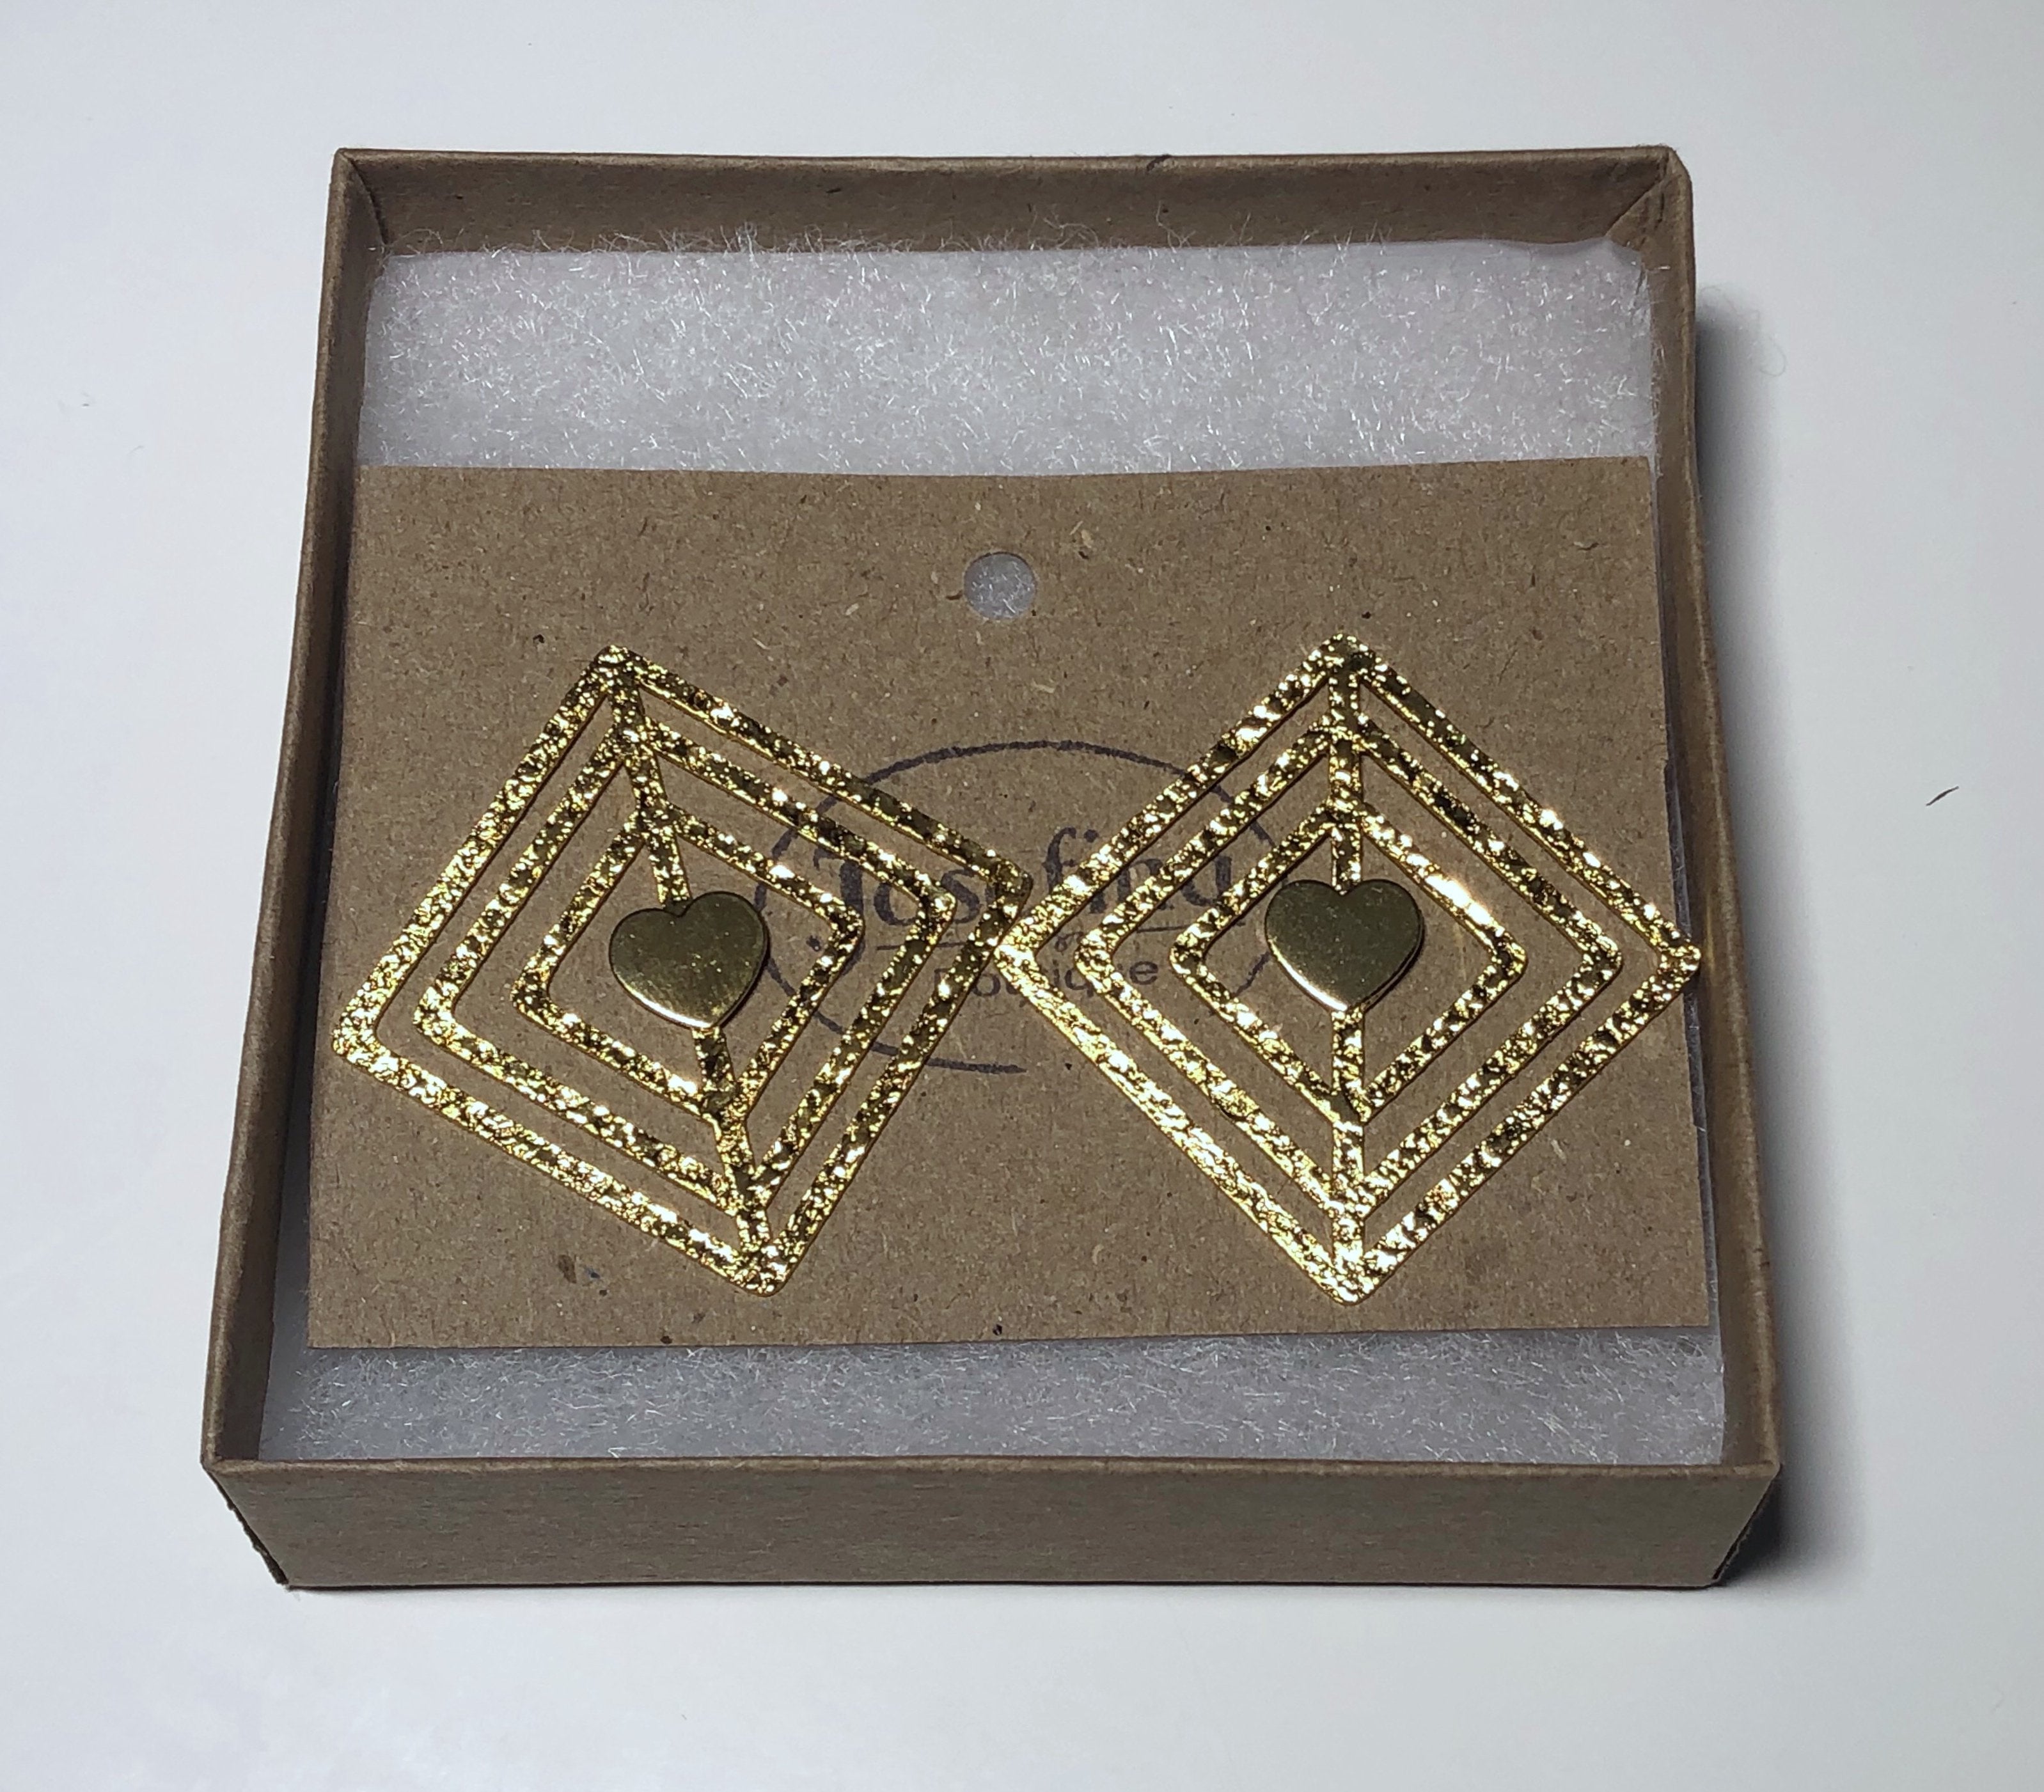 Heart in diamond earrings made of bronze with elegant texture.  For a great casual look day or night.